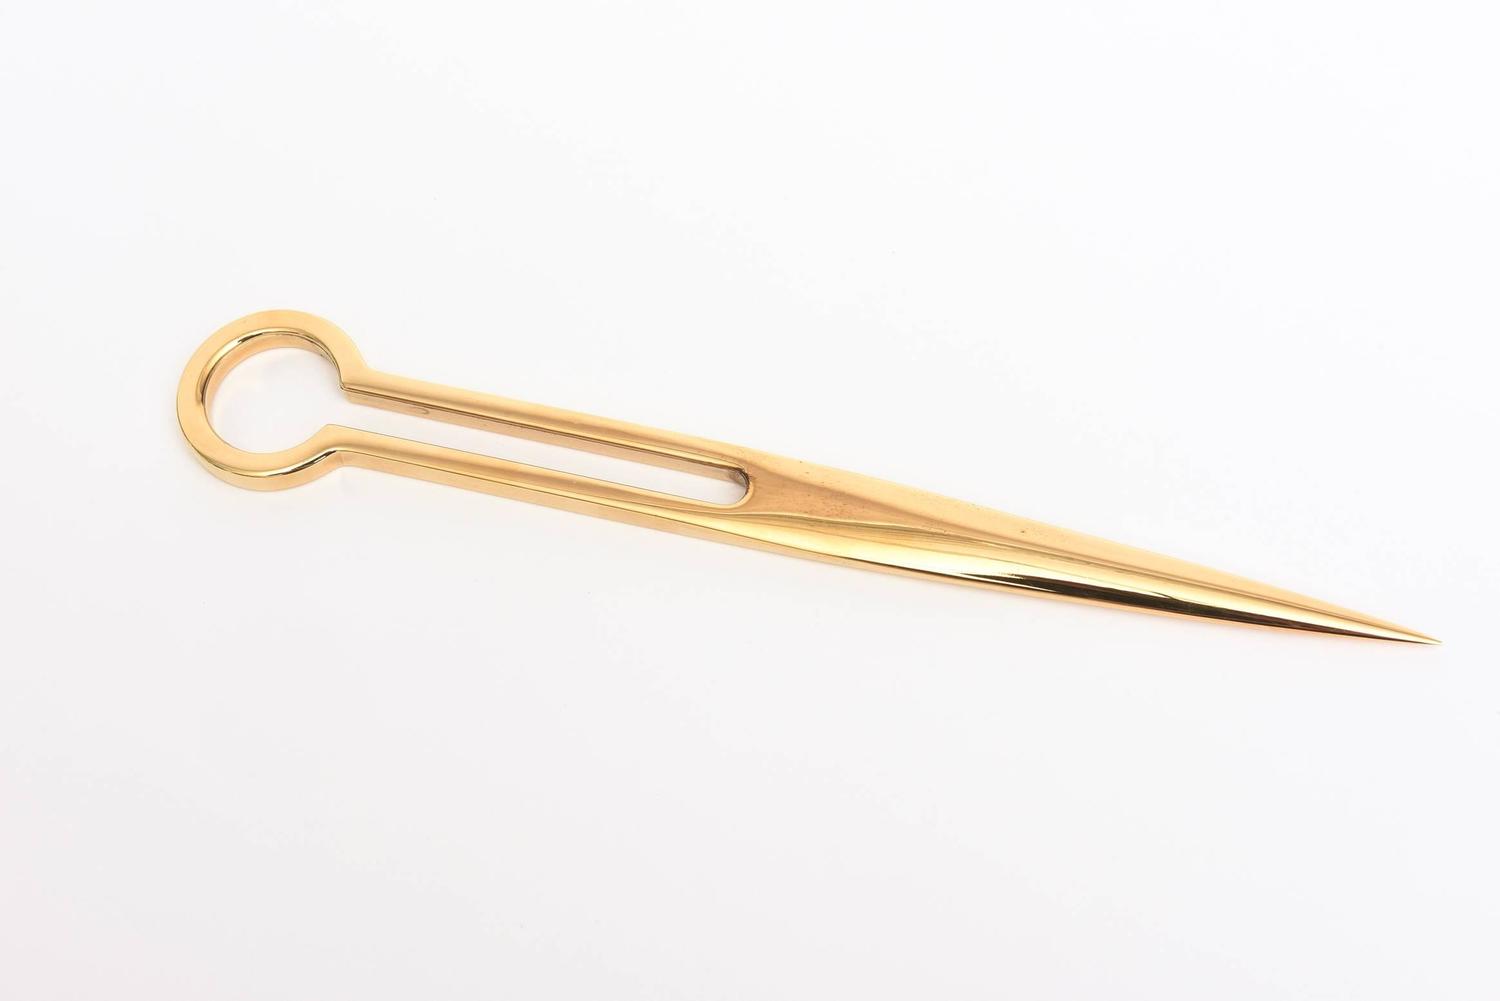 Pair of Modernist Gold-Plated Letter Opener and Scissors/Desk Accessory ...